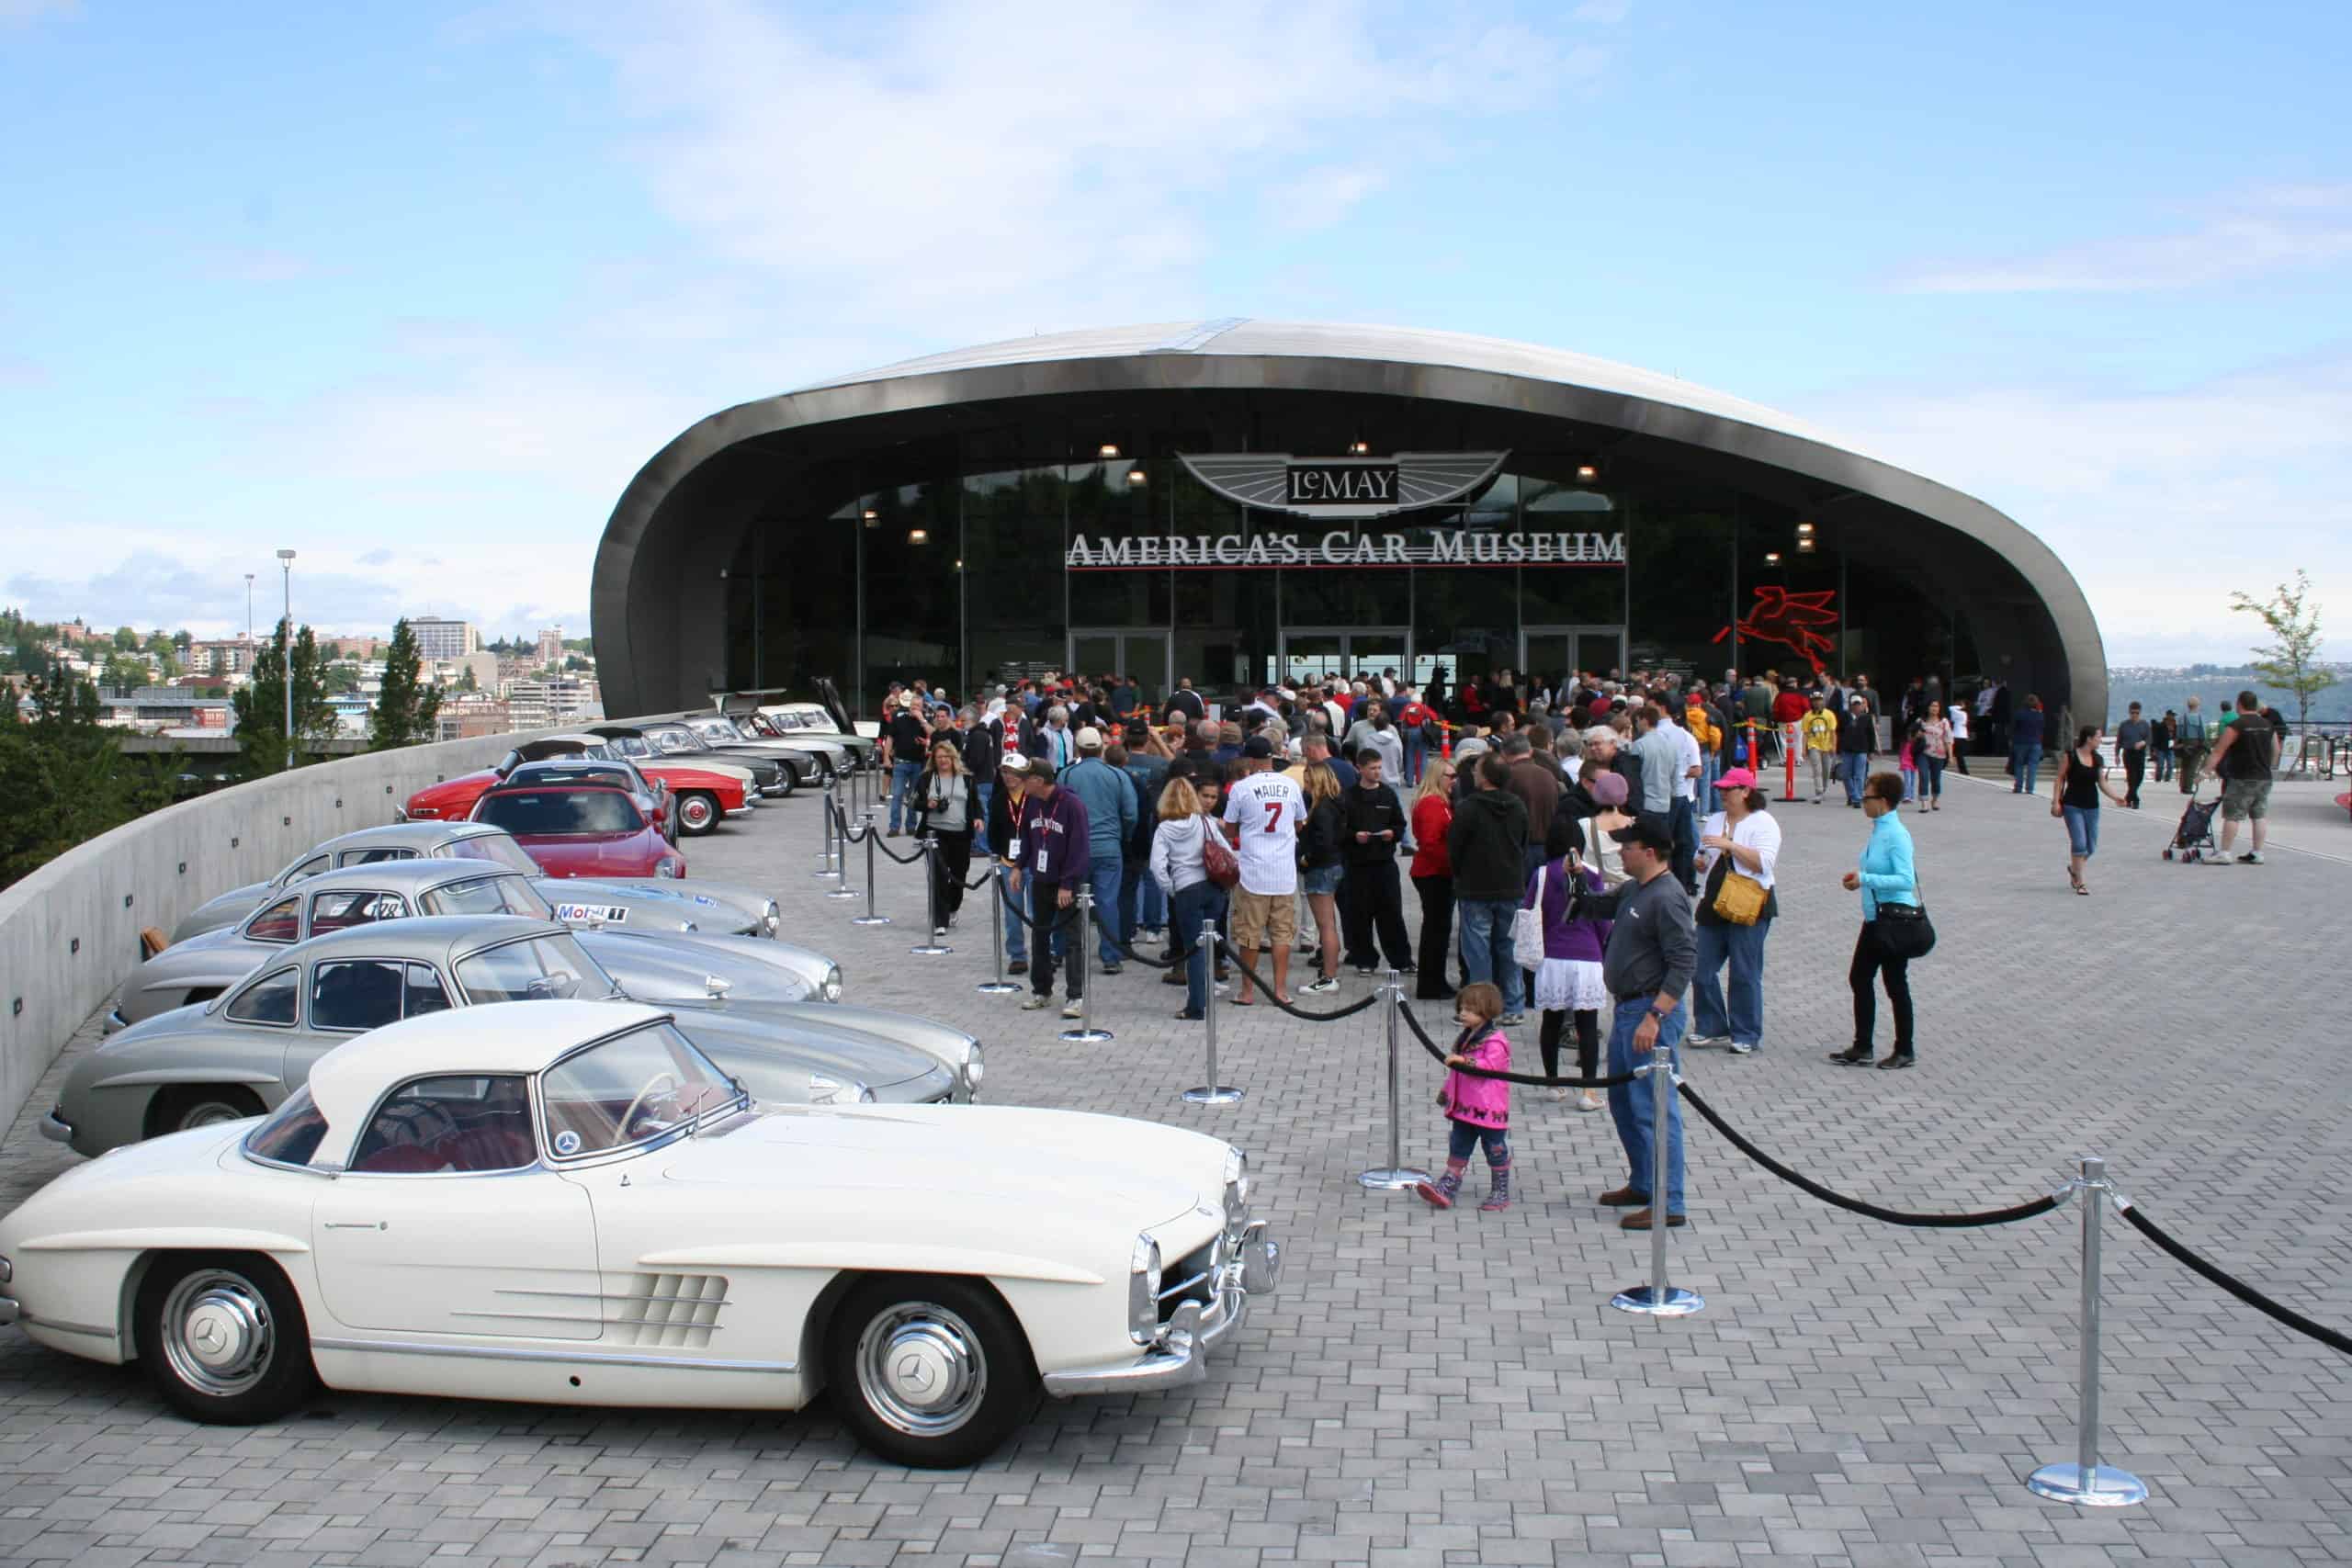 Best things to do in Tacoma Washington - Peggy Cleveland - Collector cars by LeMay America's Care Museum courtesy of Travel Tacoma